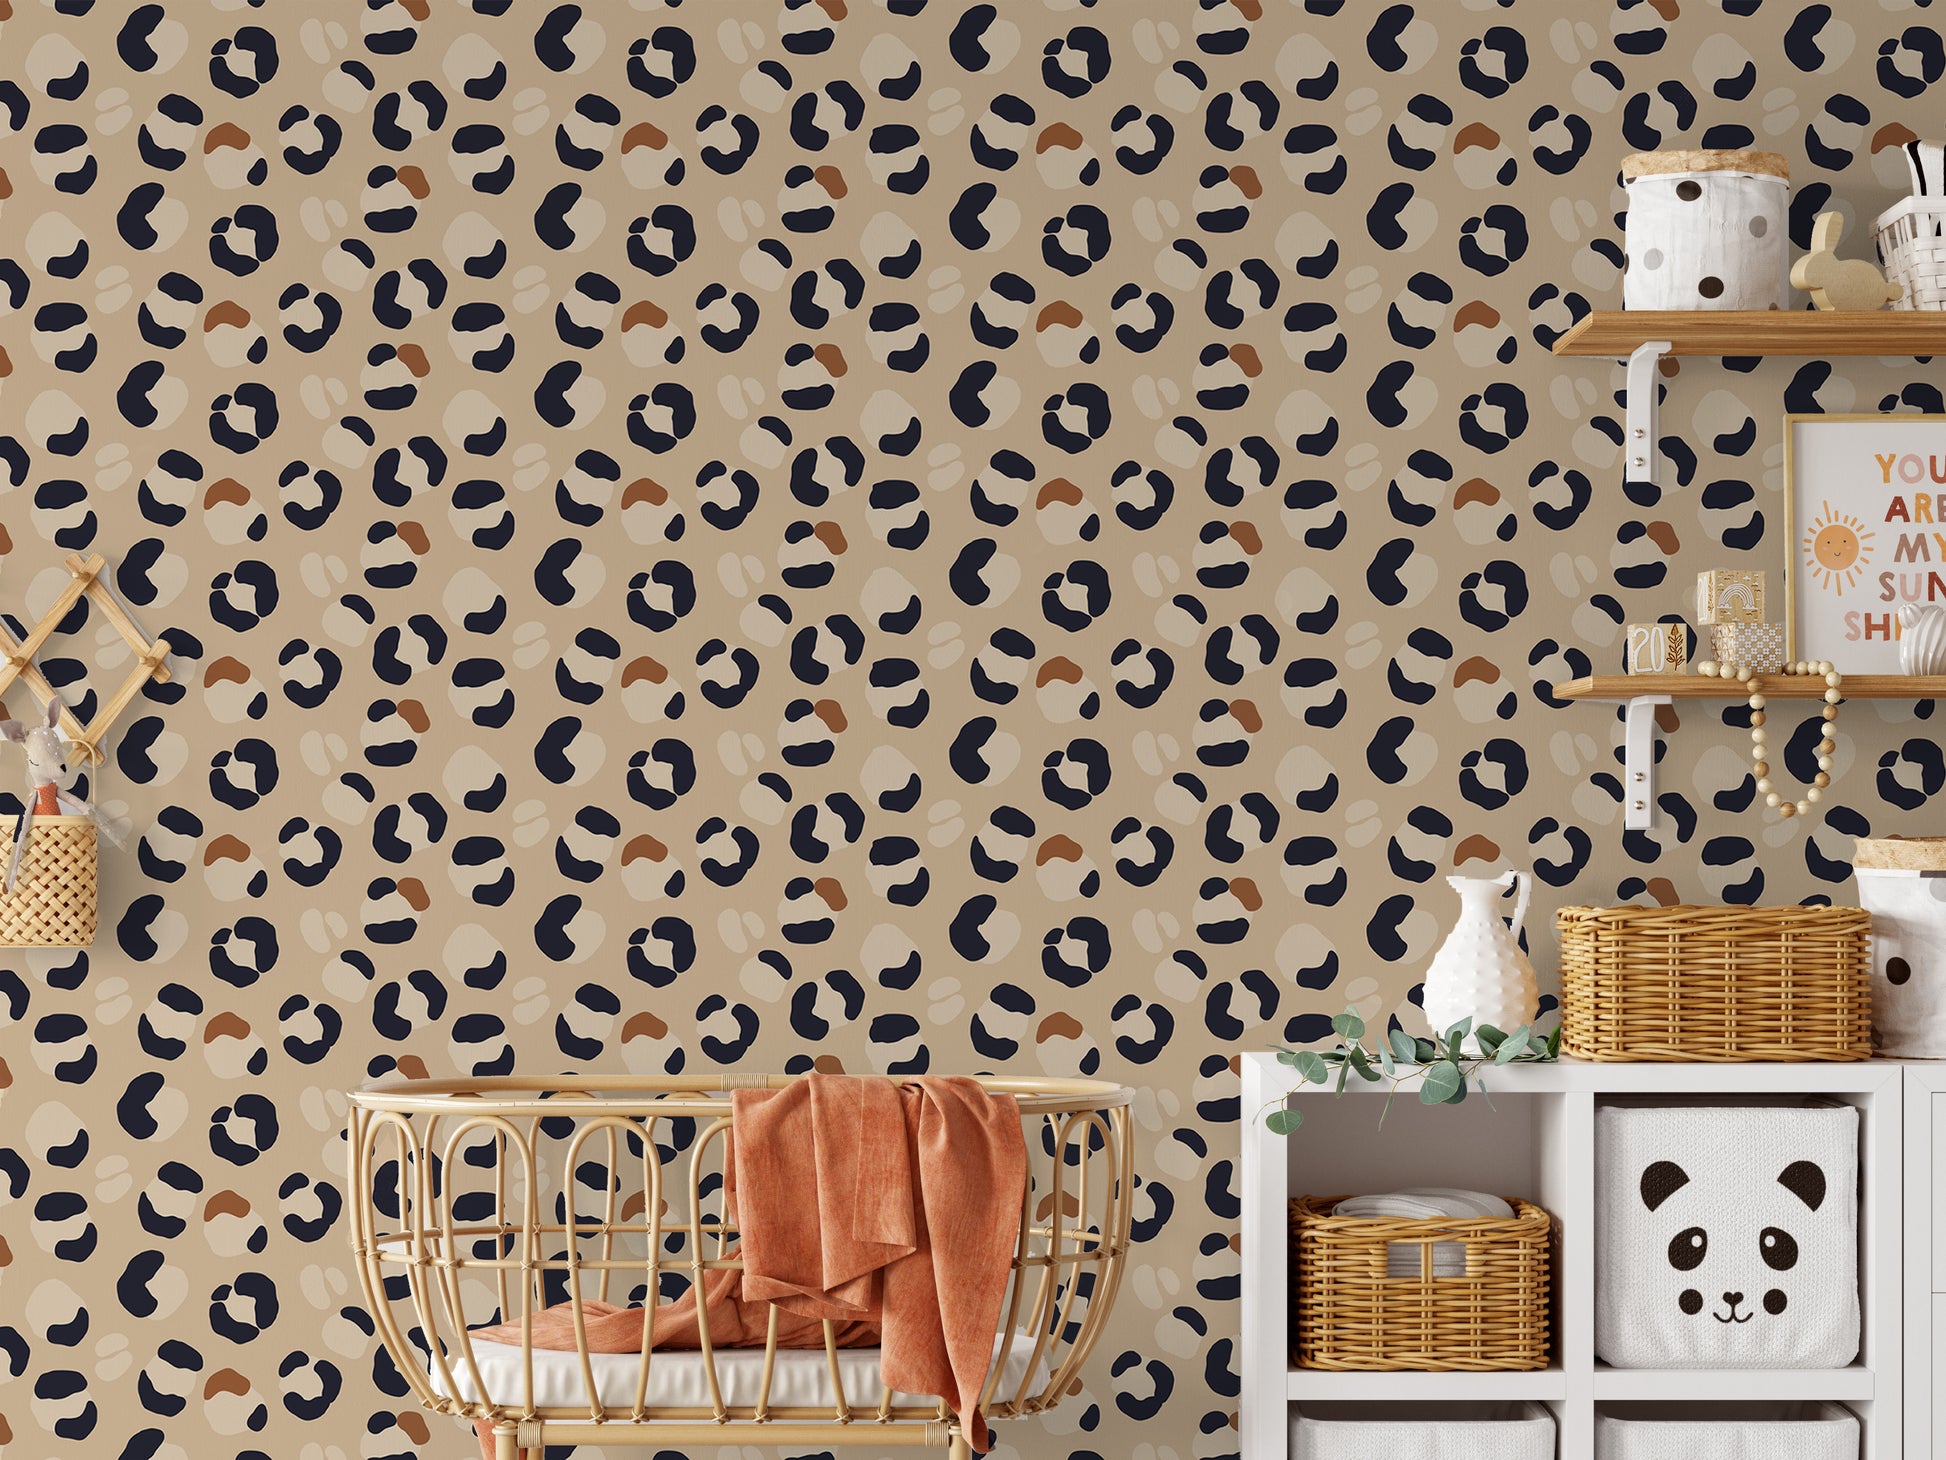 Leopard Print Is My Neutral Removable Peel And Stick Wallpaper